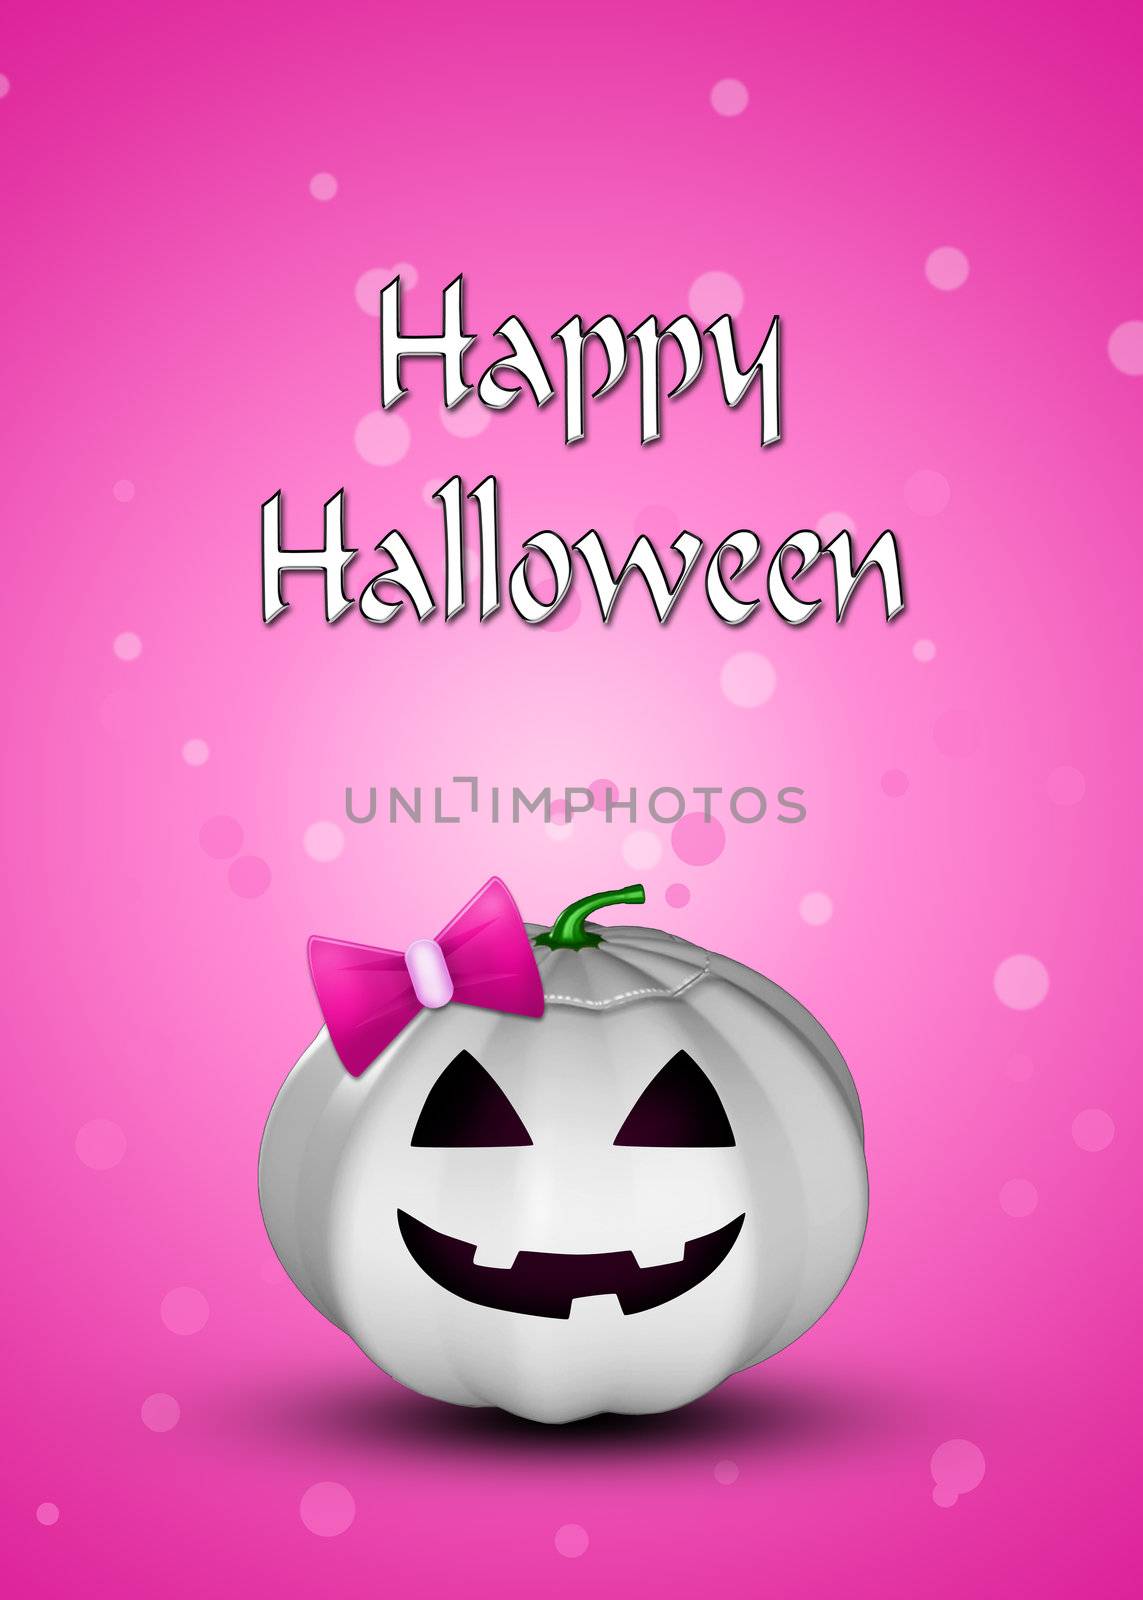 Halloween illustration: a white pumpkin with a pink bow on a pink background with bokeh.